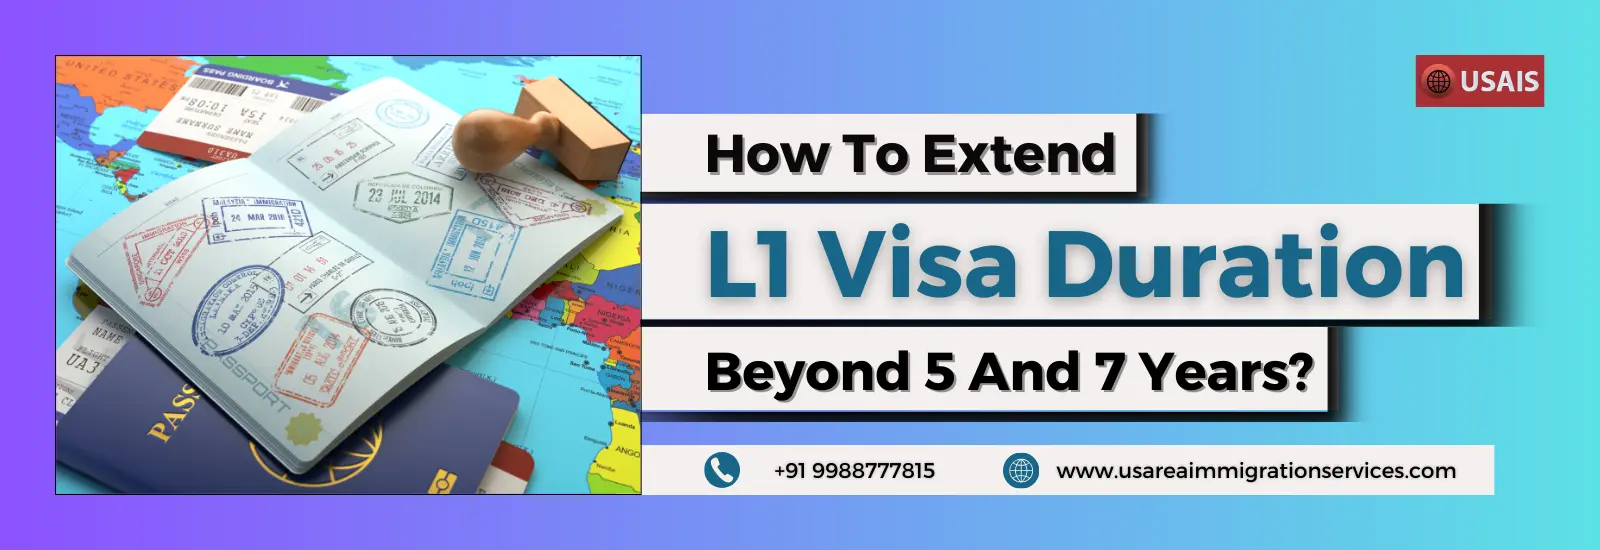 Extend-L1-Visa-Duration-Beyond-5-And-7-Years